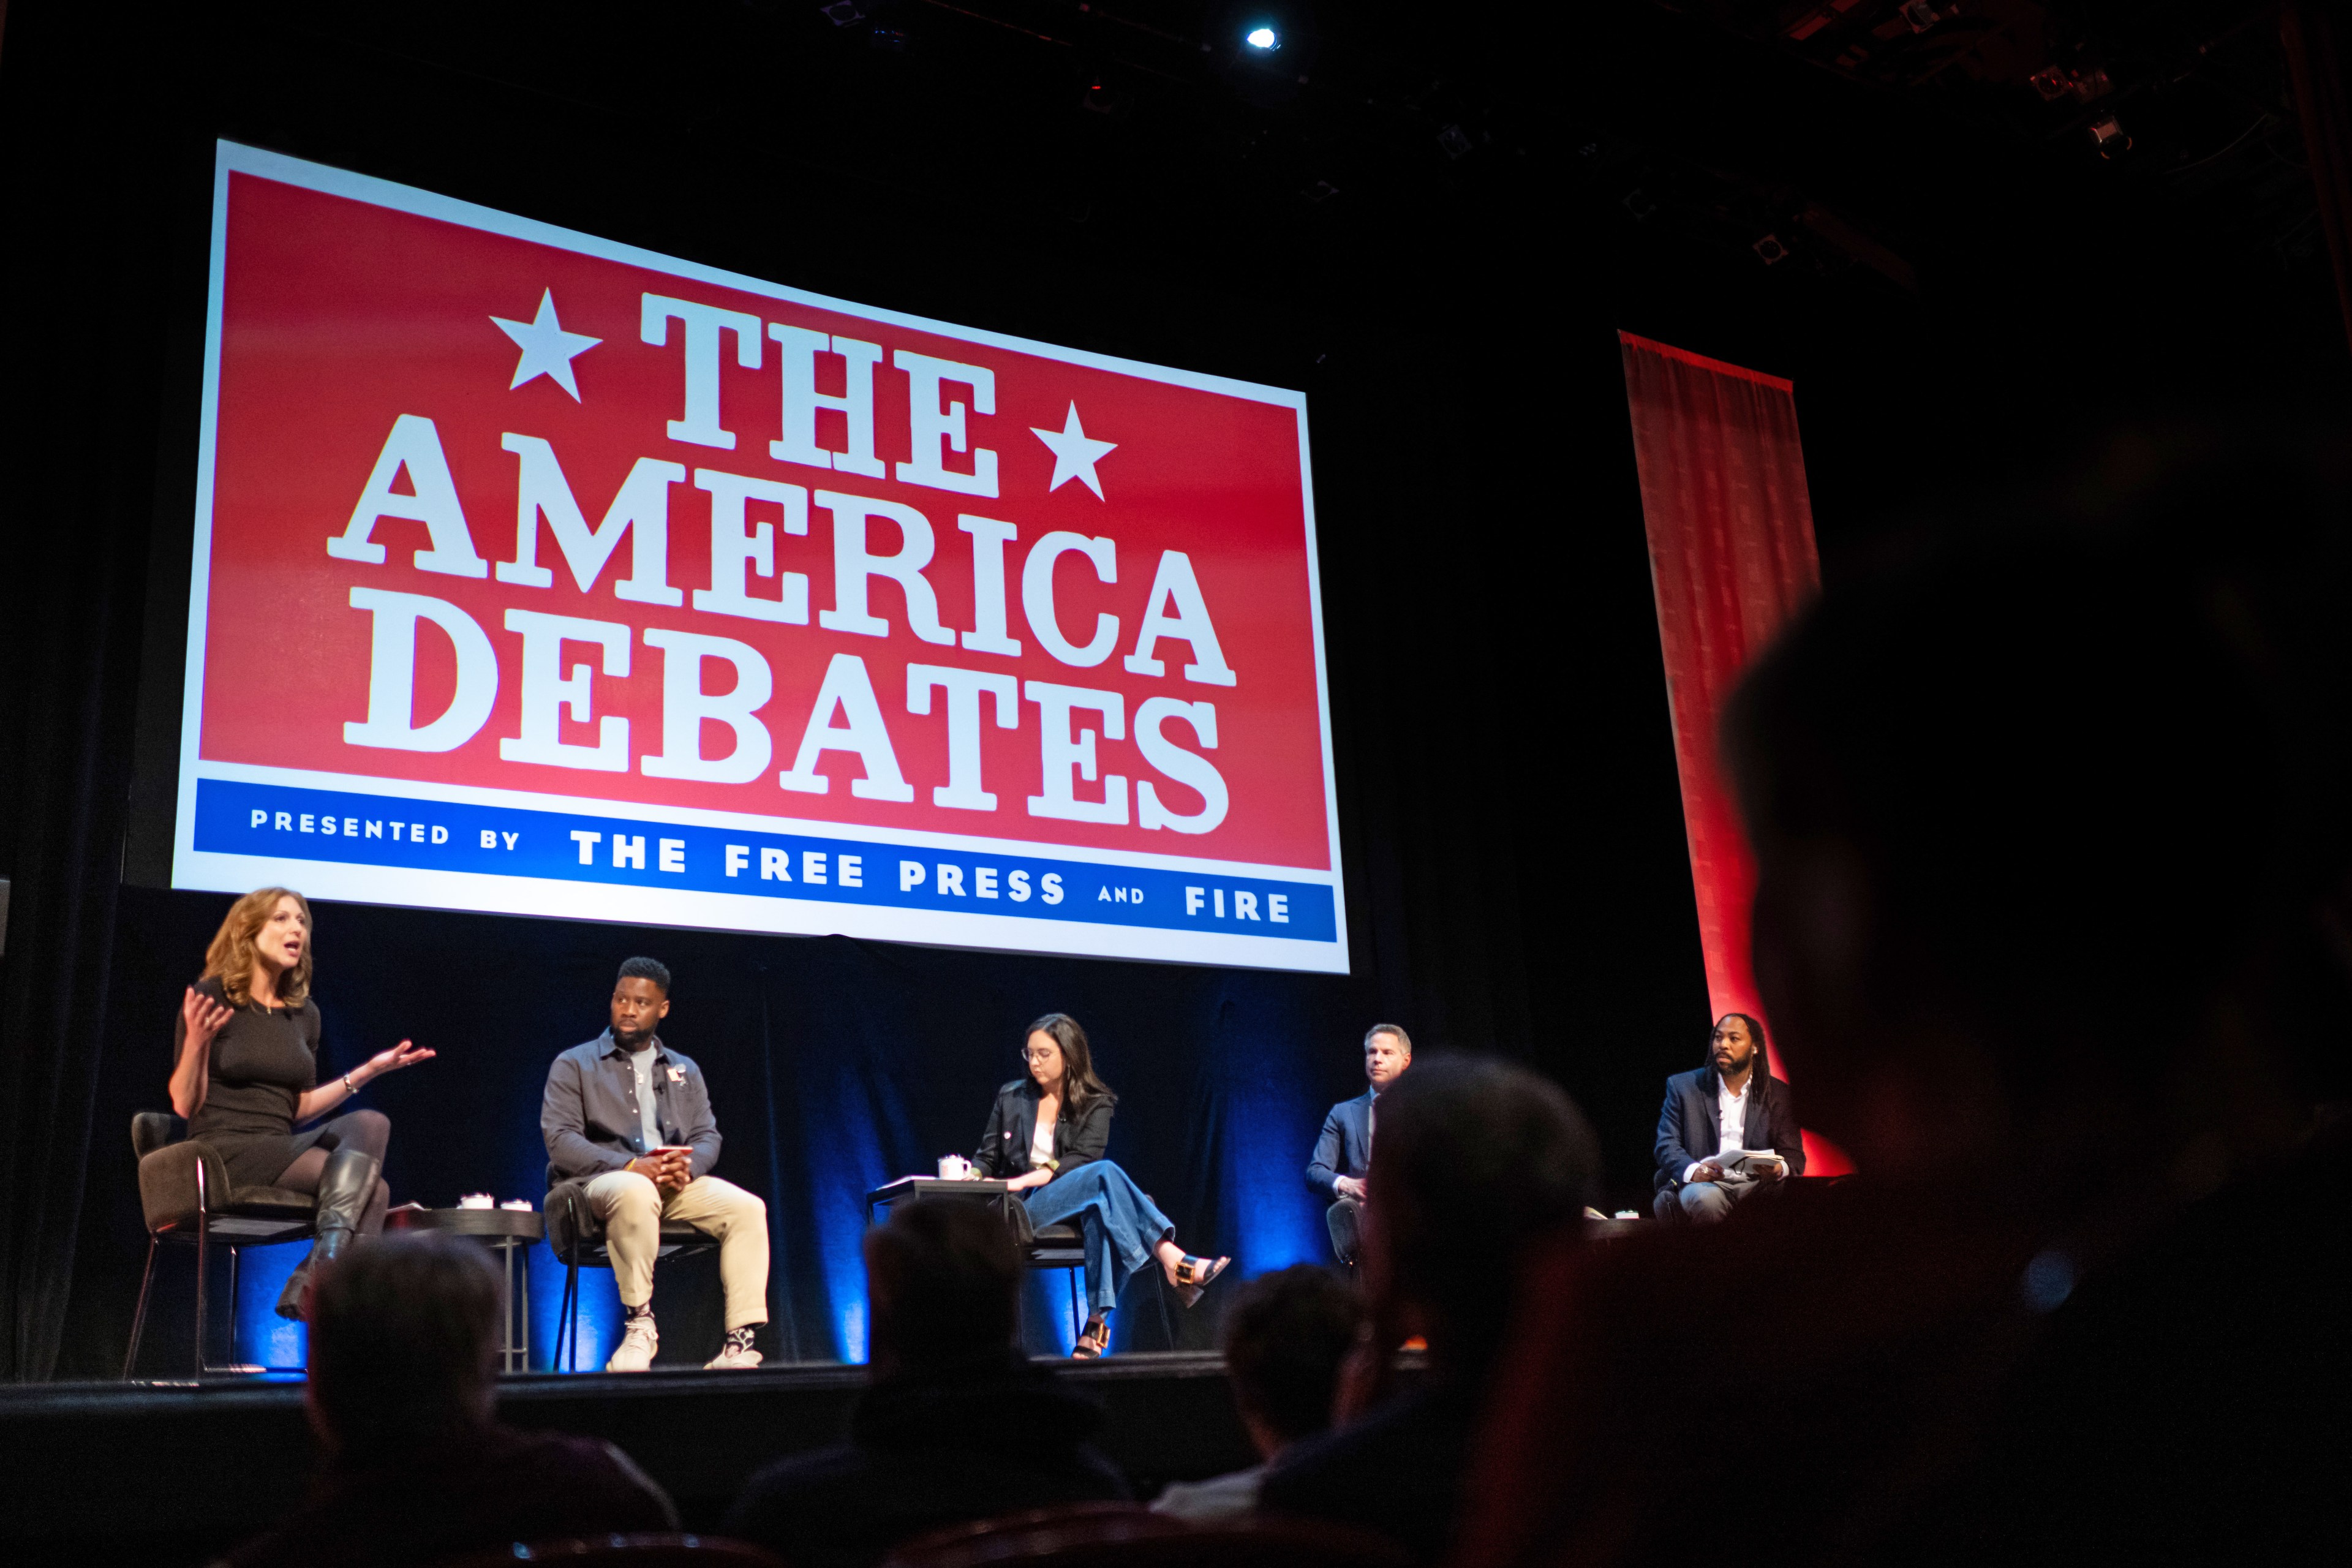 Five individuals are seated on stage under a large sign reading "The America Debates," hosted by The Free Press and FIRE, engaging in a discussion or debate.